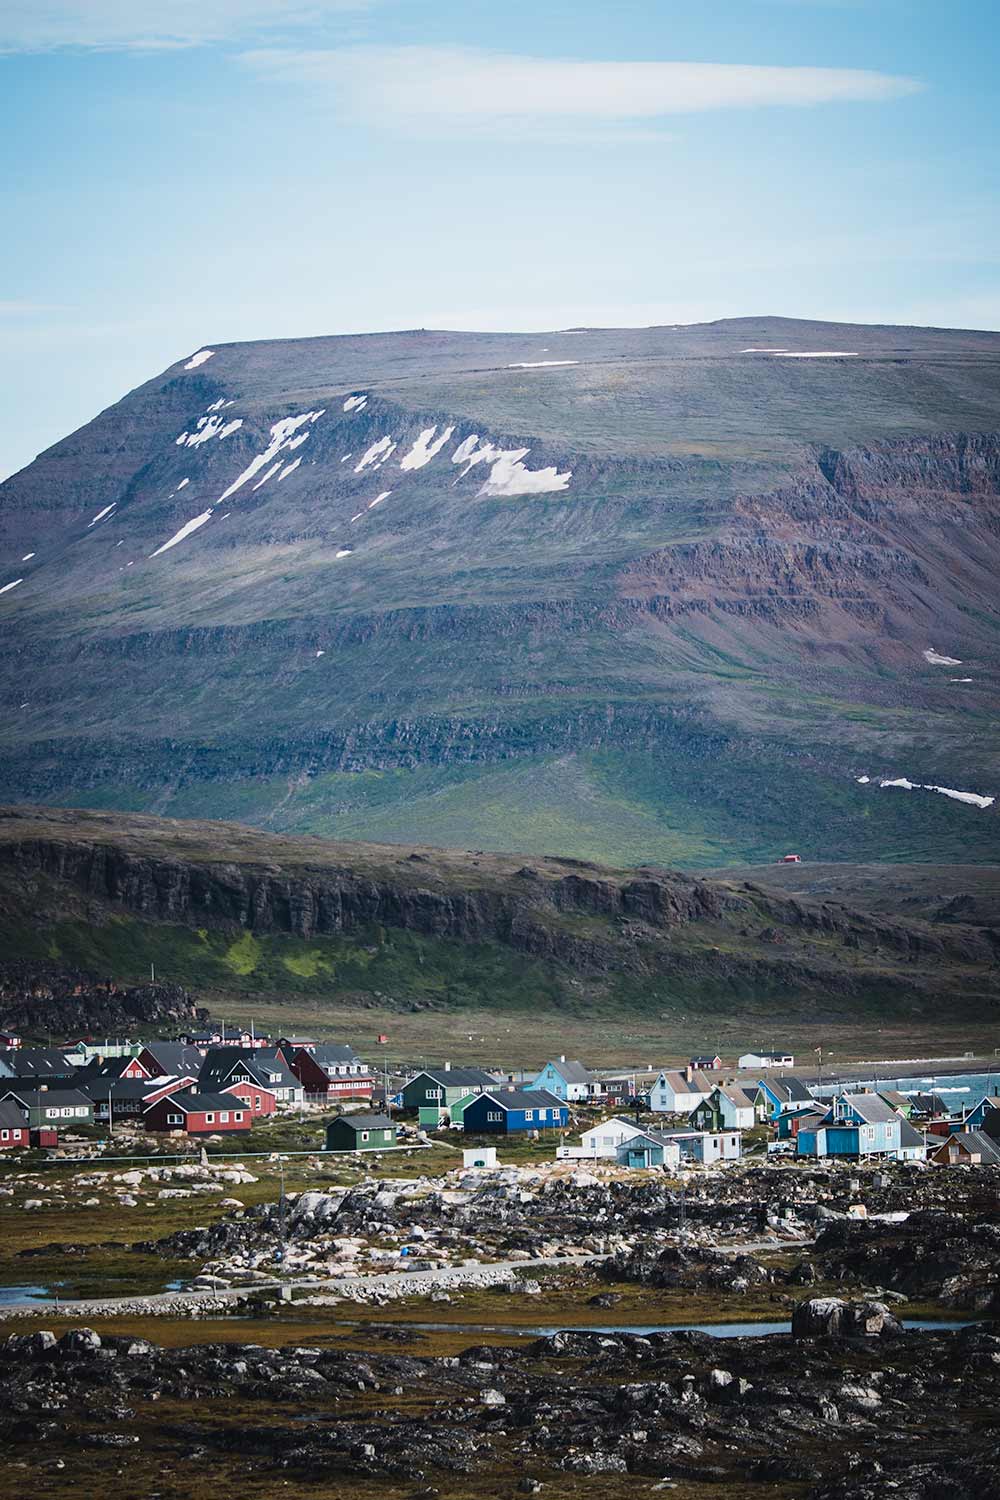 The contrast of colorful houses against Disko Island's pristine landscapes